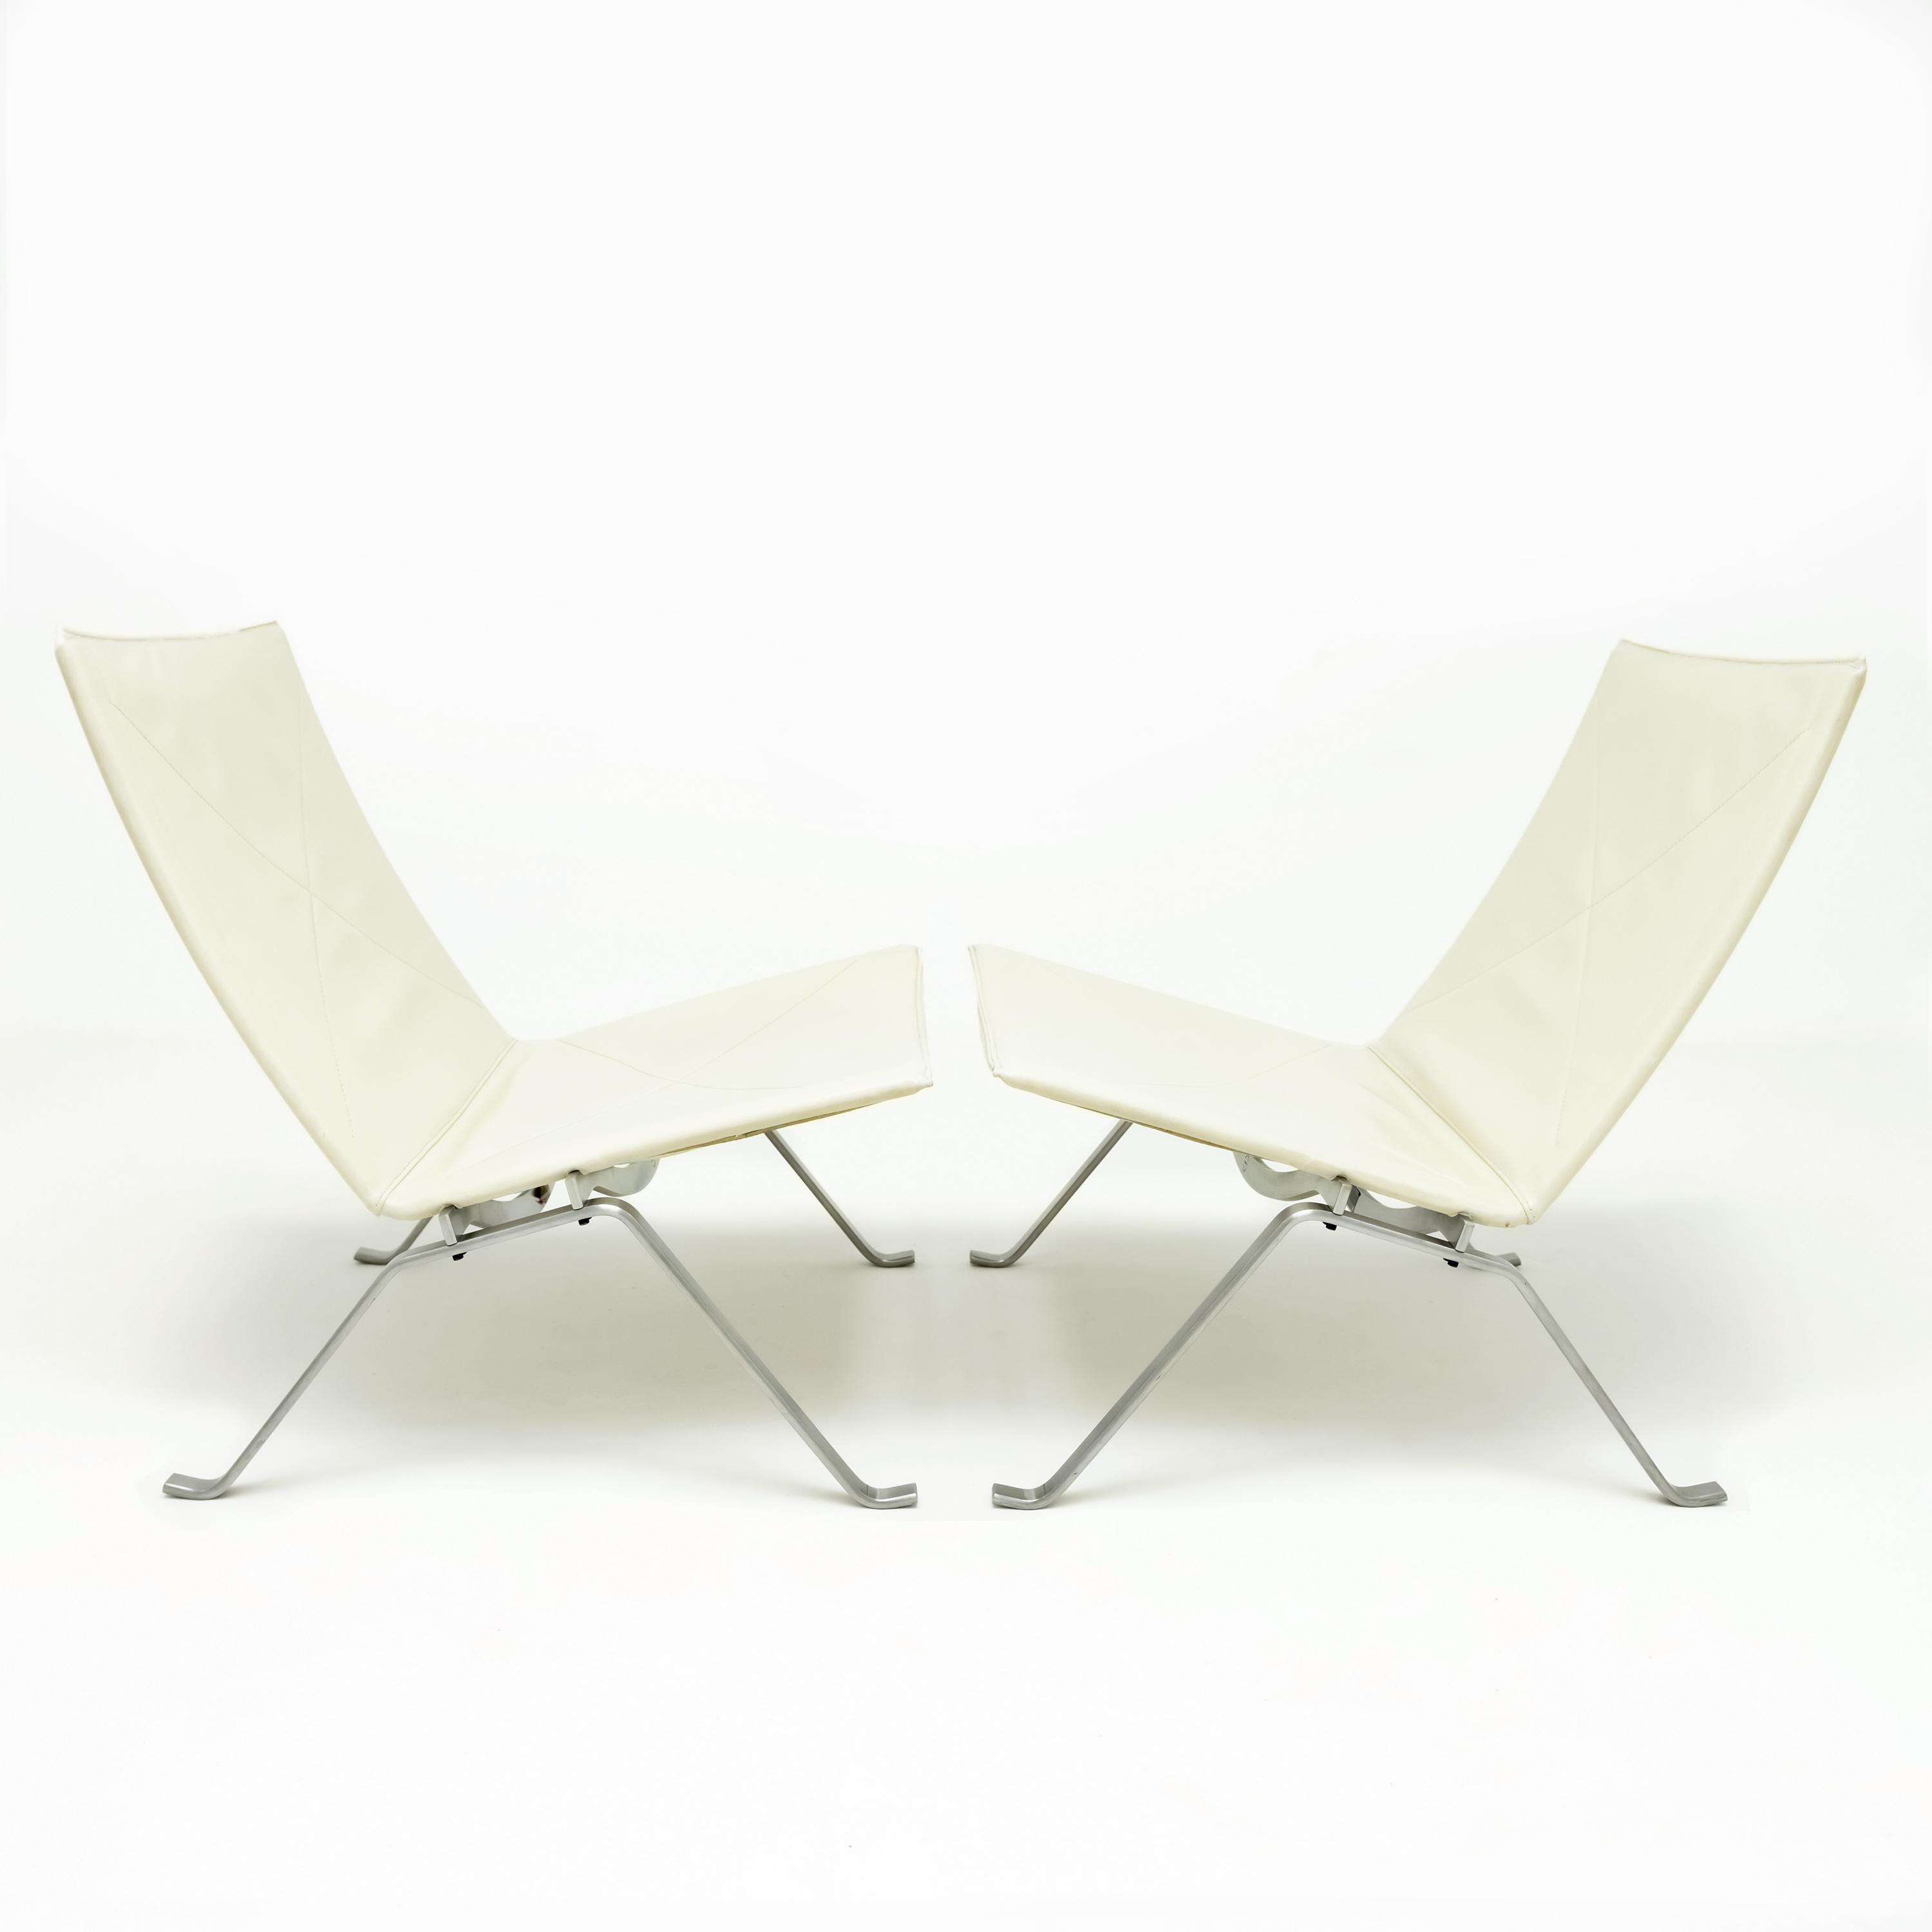 Mid-Century Modern Pair of Poul Kjaerholm PK22 Lounge Chairs in Cream Leather for Fritz Hansen